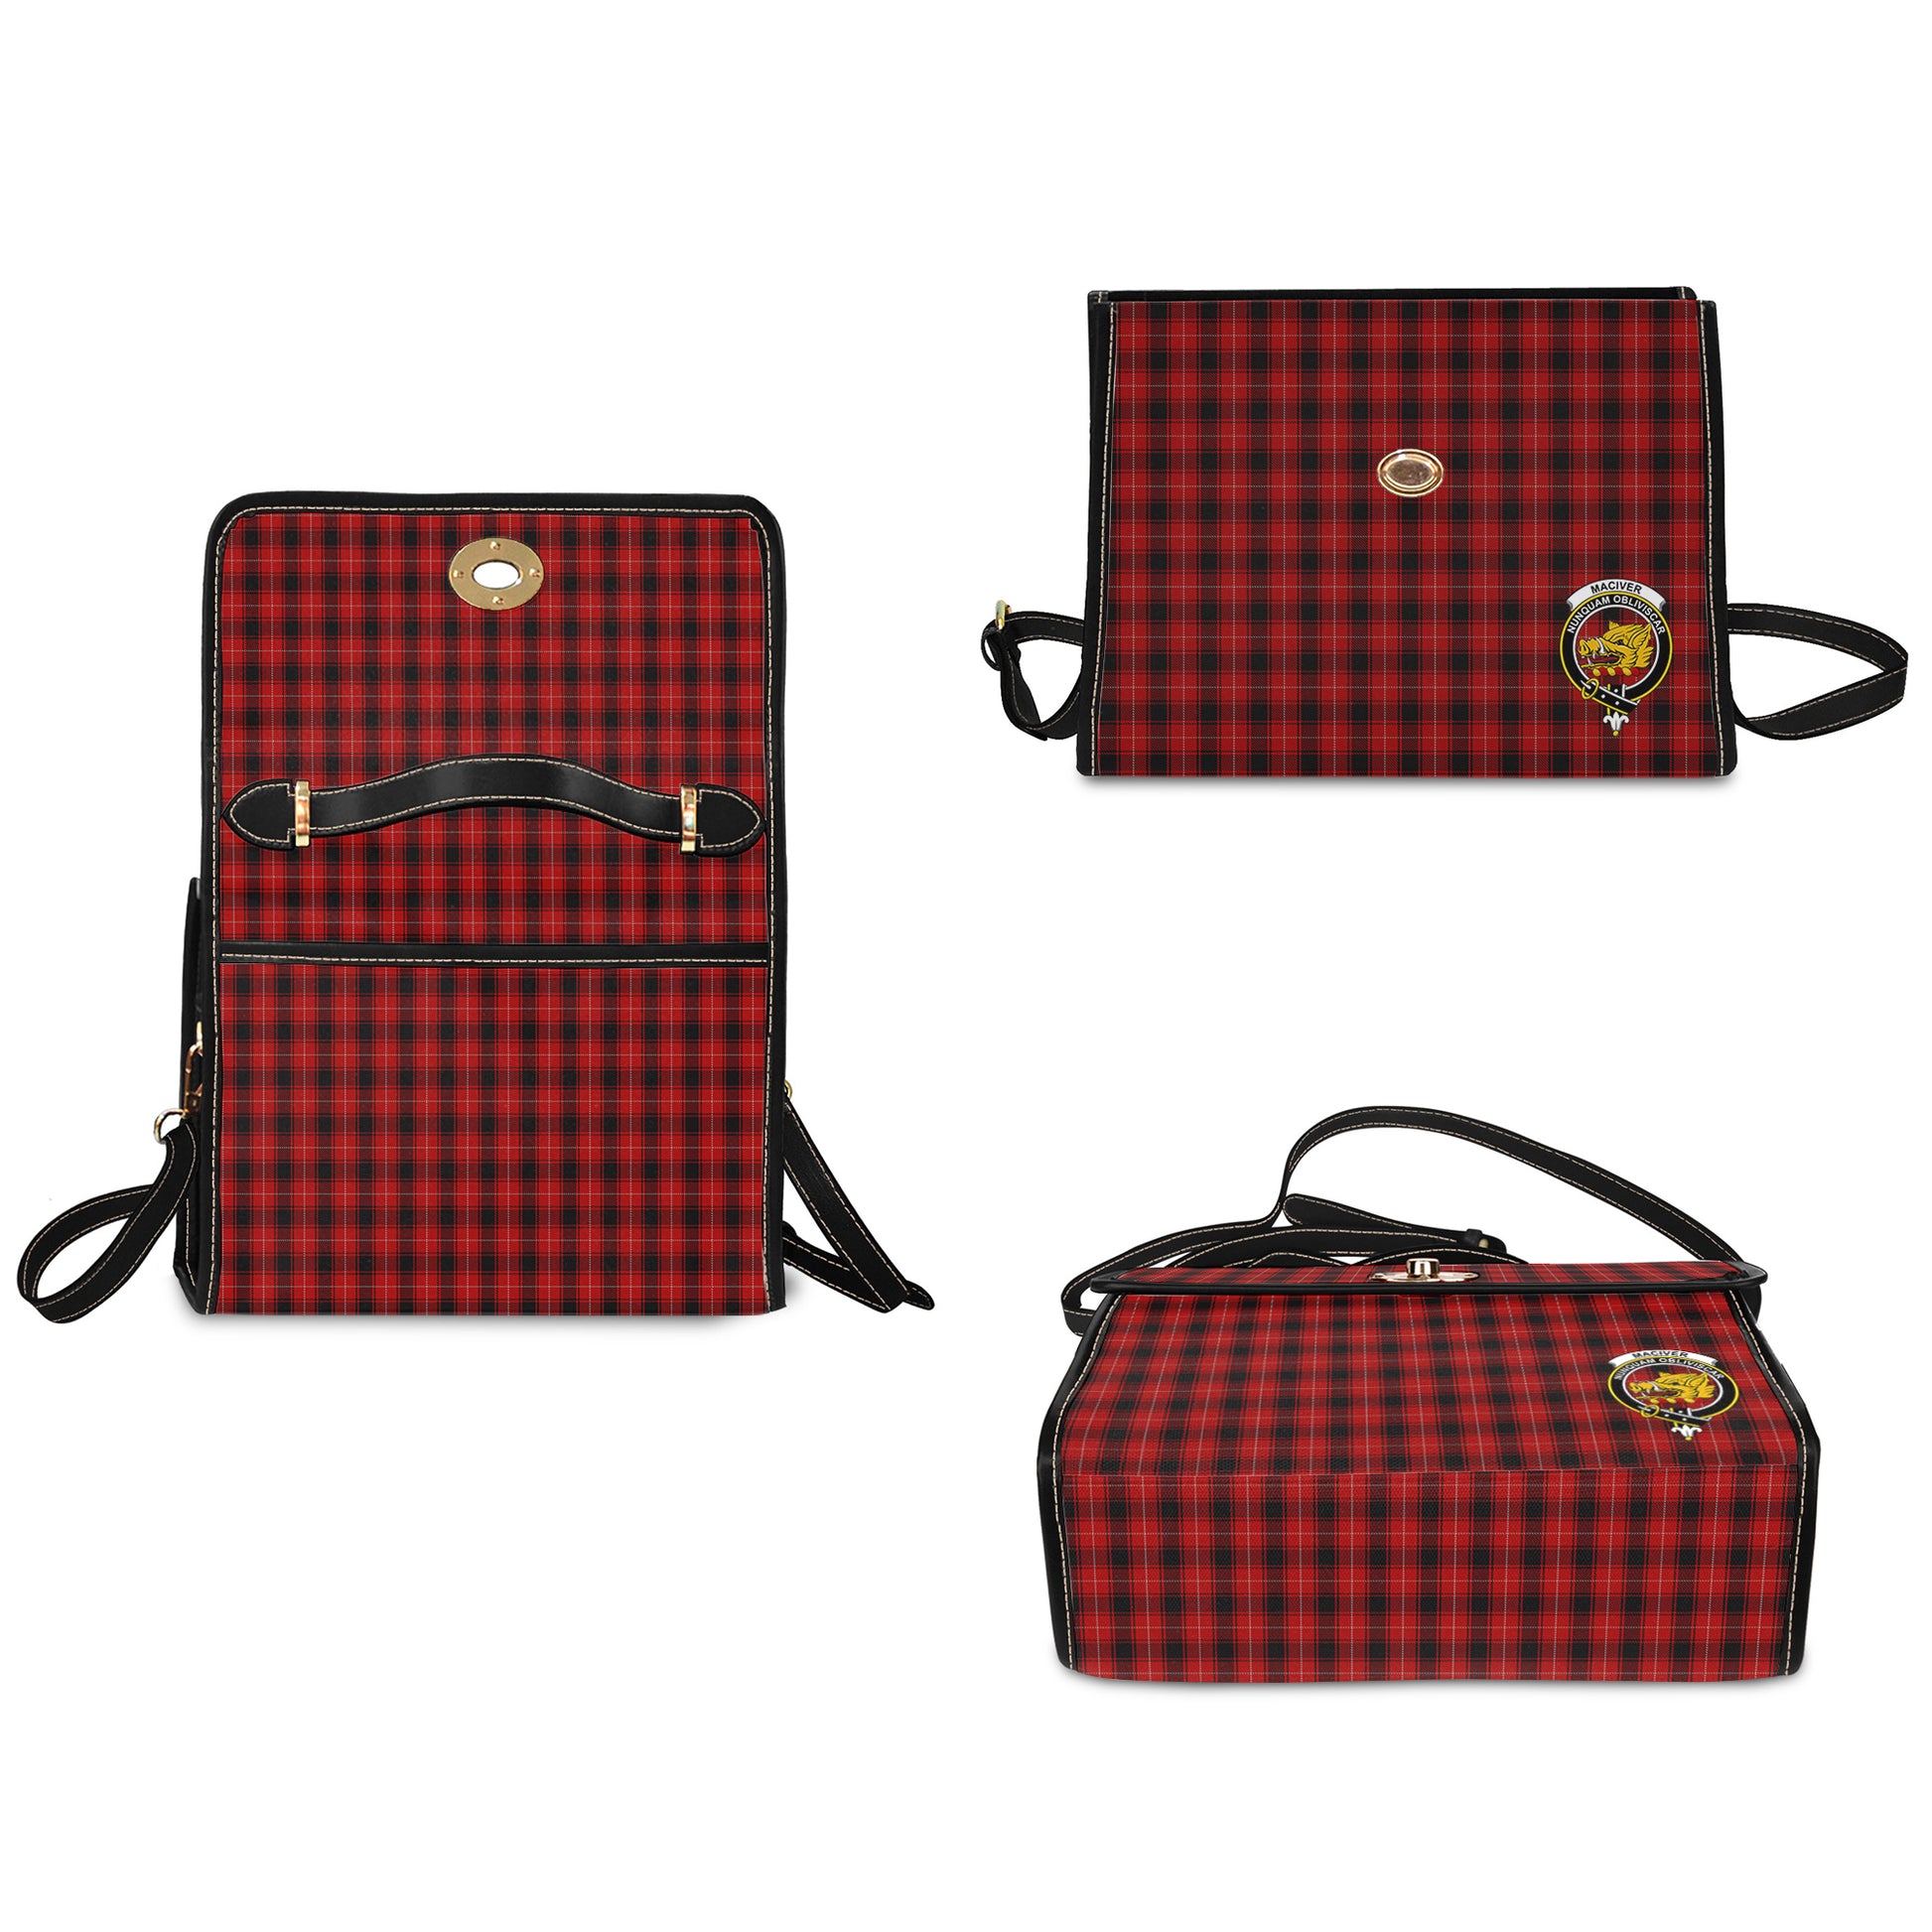 maciver-tartan-leather-strap-waterproof-canvas-bag-with-family-crest